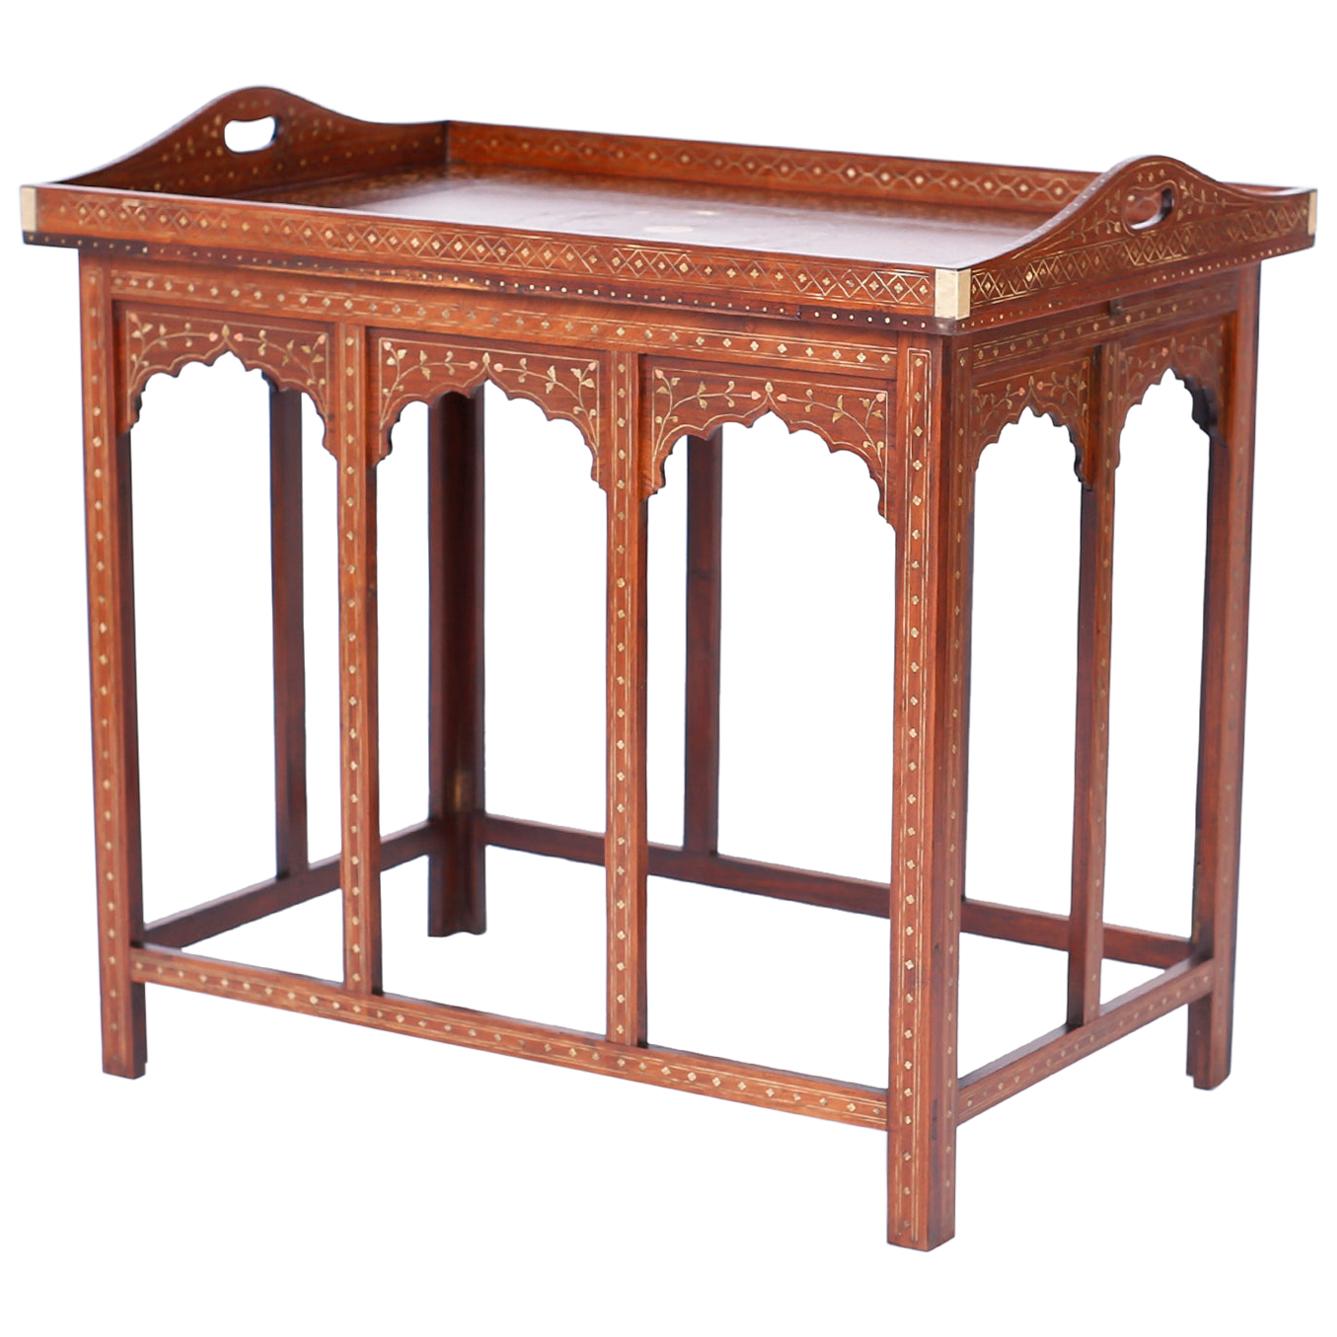 Anglo-Indian Rosewood Inlaid Tray Table